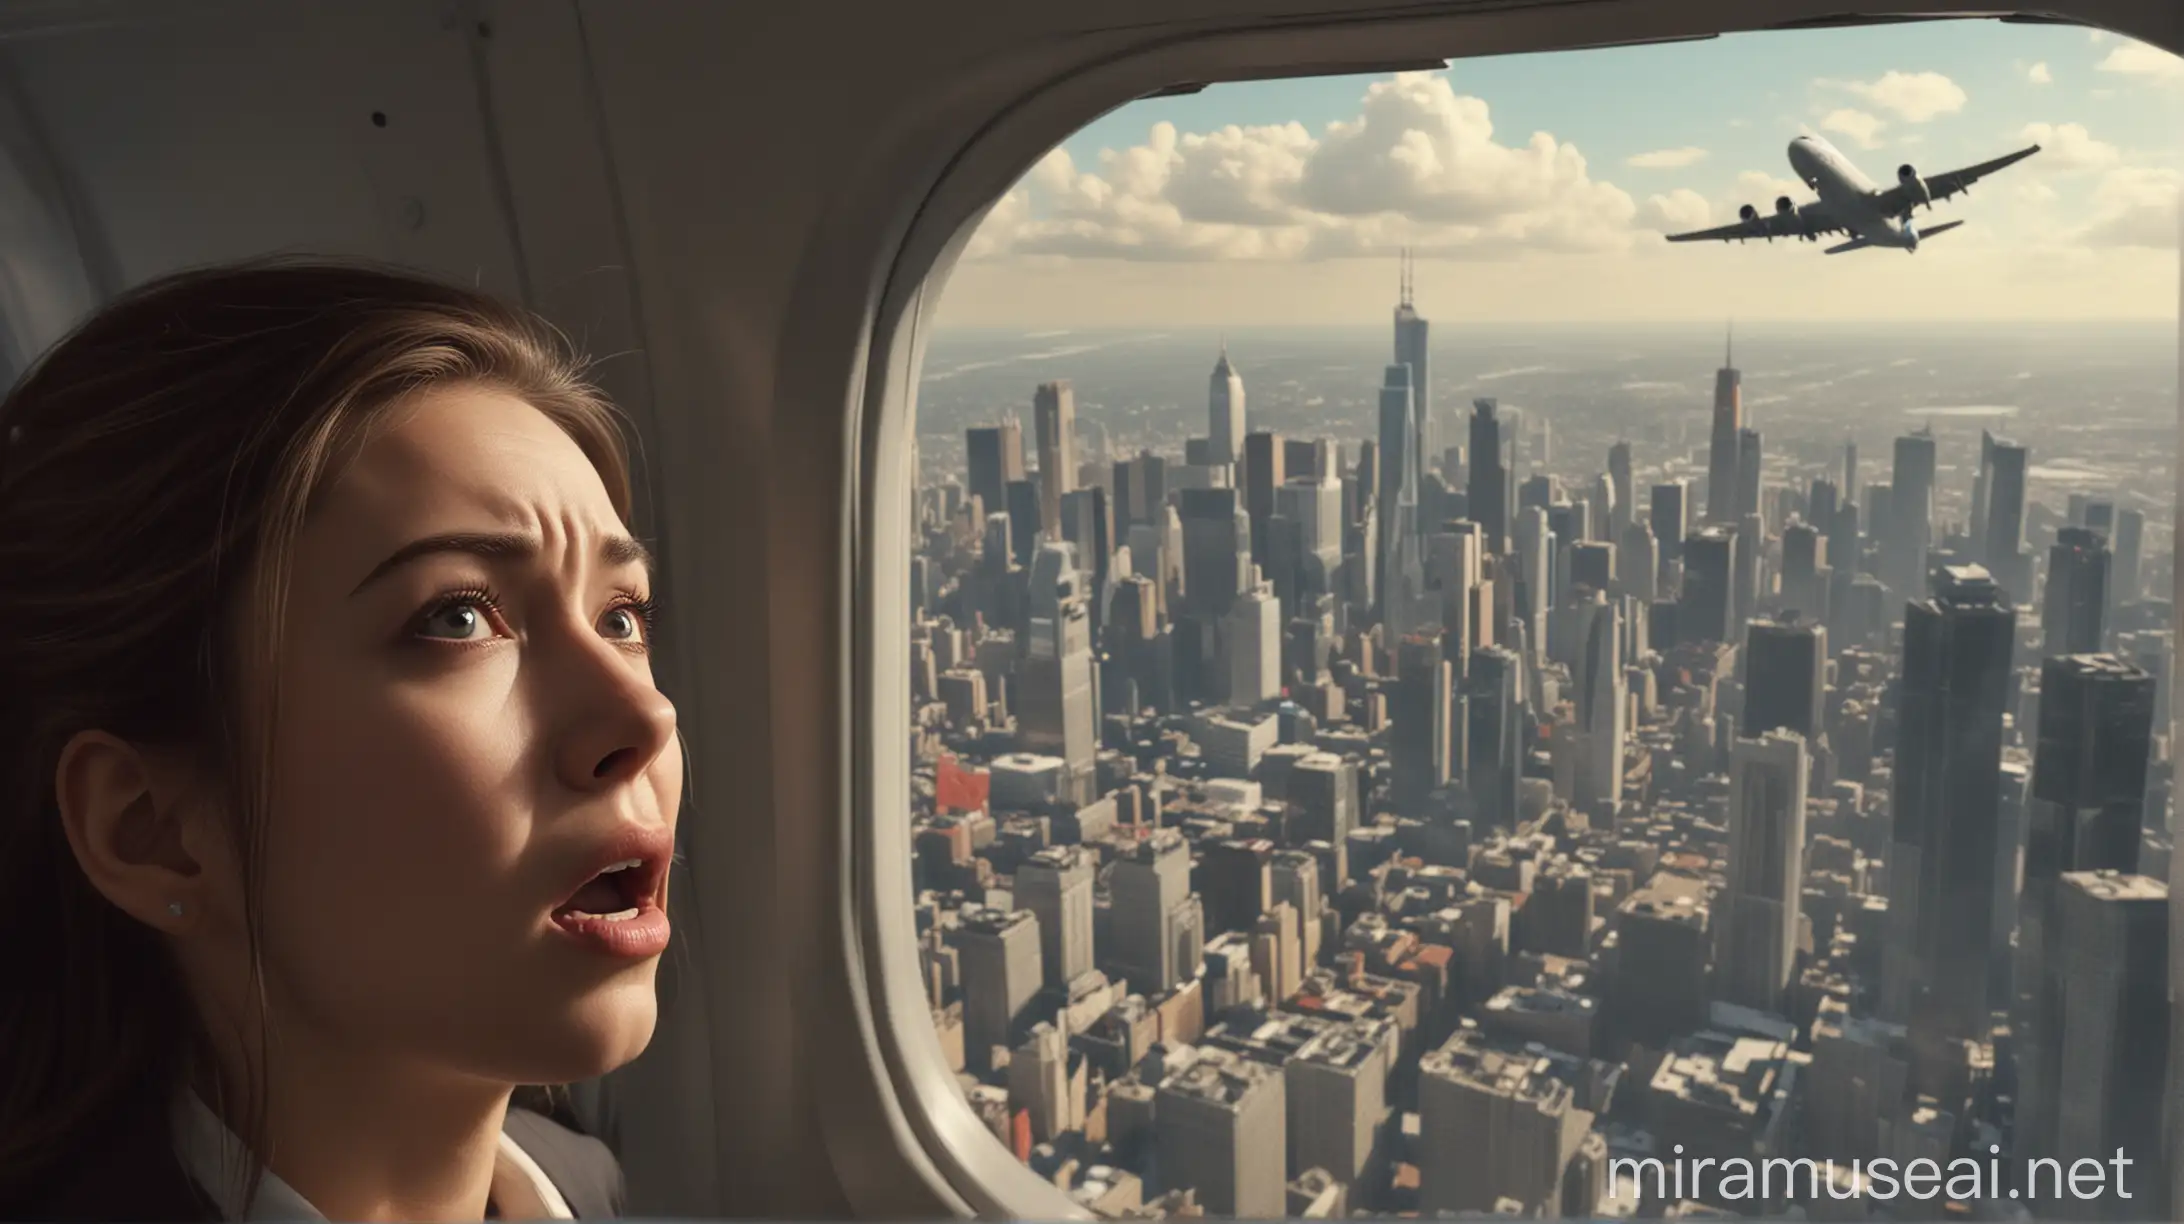 In the foreground, a woman looks out of the airplane window with a terrified expression. In the background ,airplanes are flying at low altitude among the skyscrapers of a big city, maneuvering in a restricted airspace. Realistic